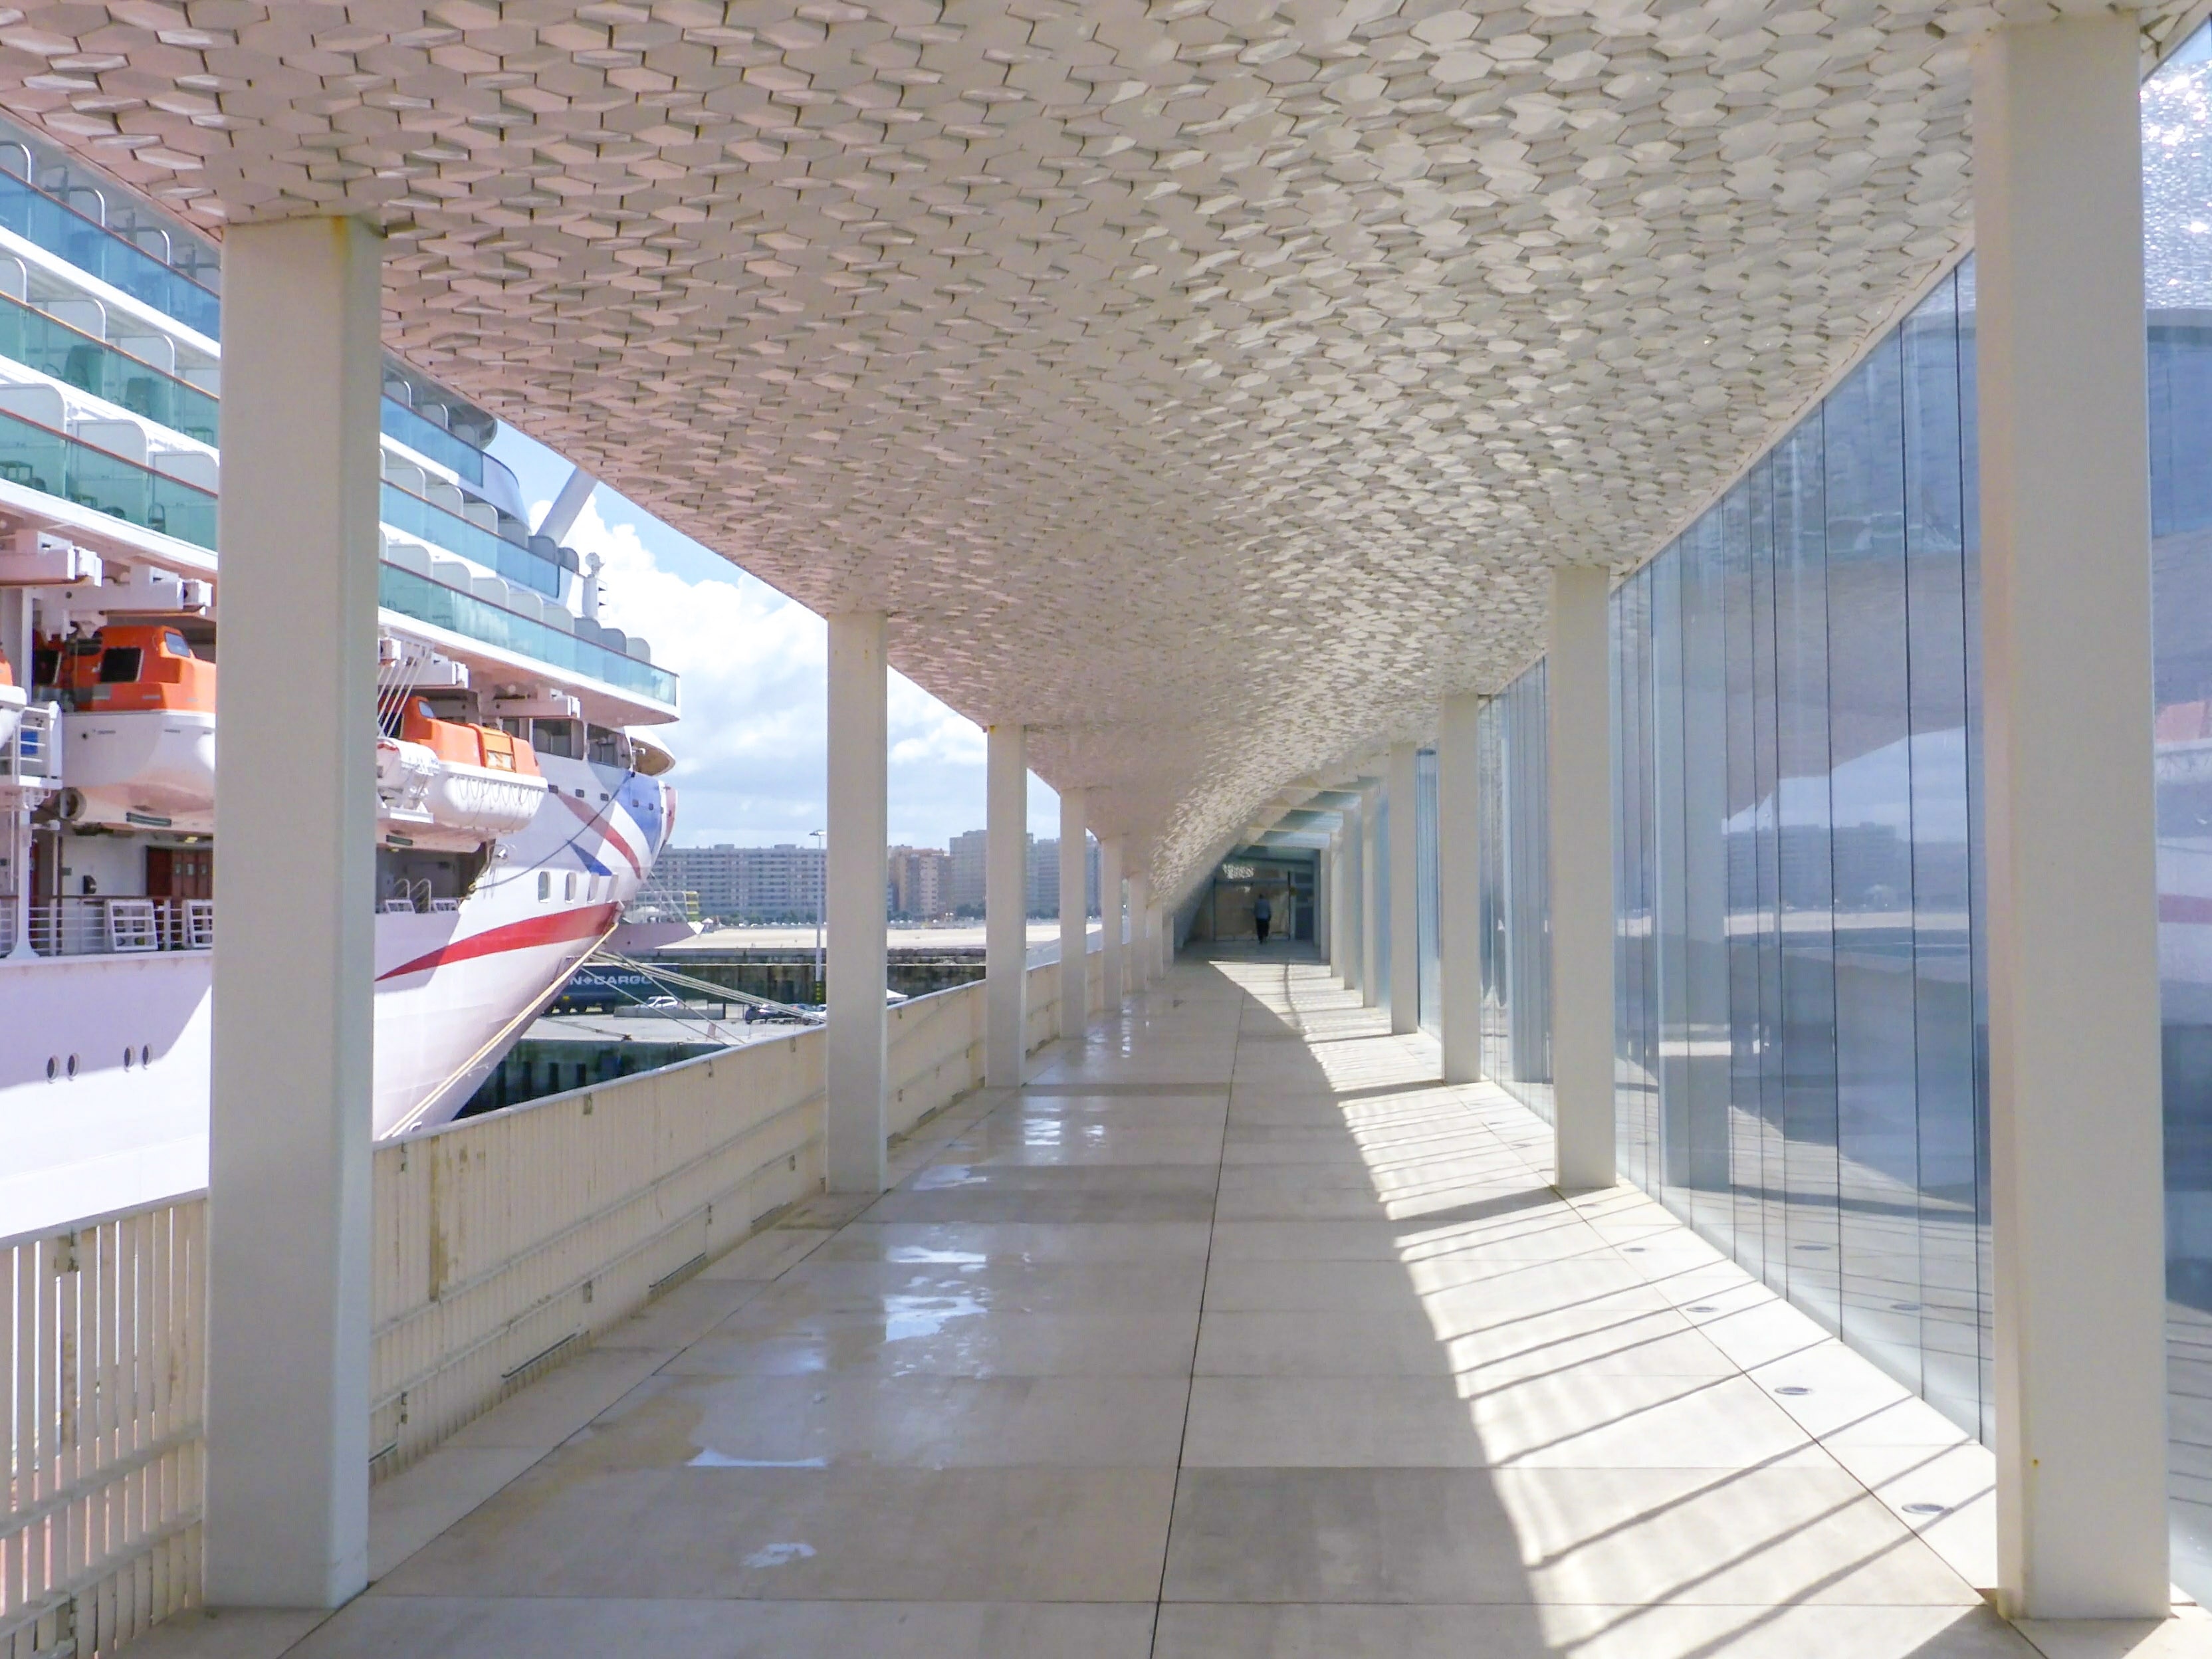 Leixoes cruise terminal, which serves Porto. Viewed to the left is P&O Azura. The terminal building is cladded with honeycomb style tiles.